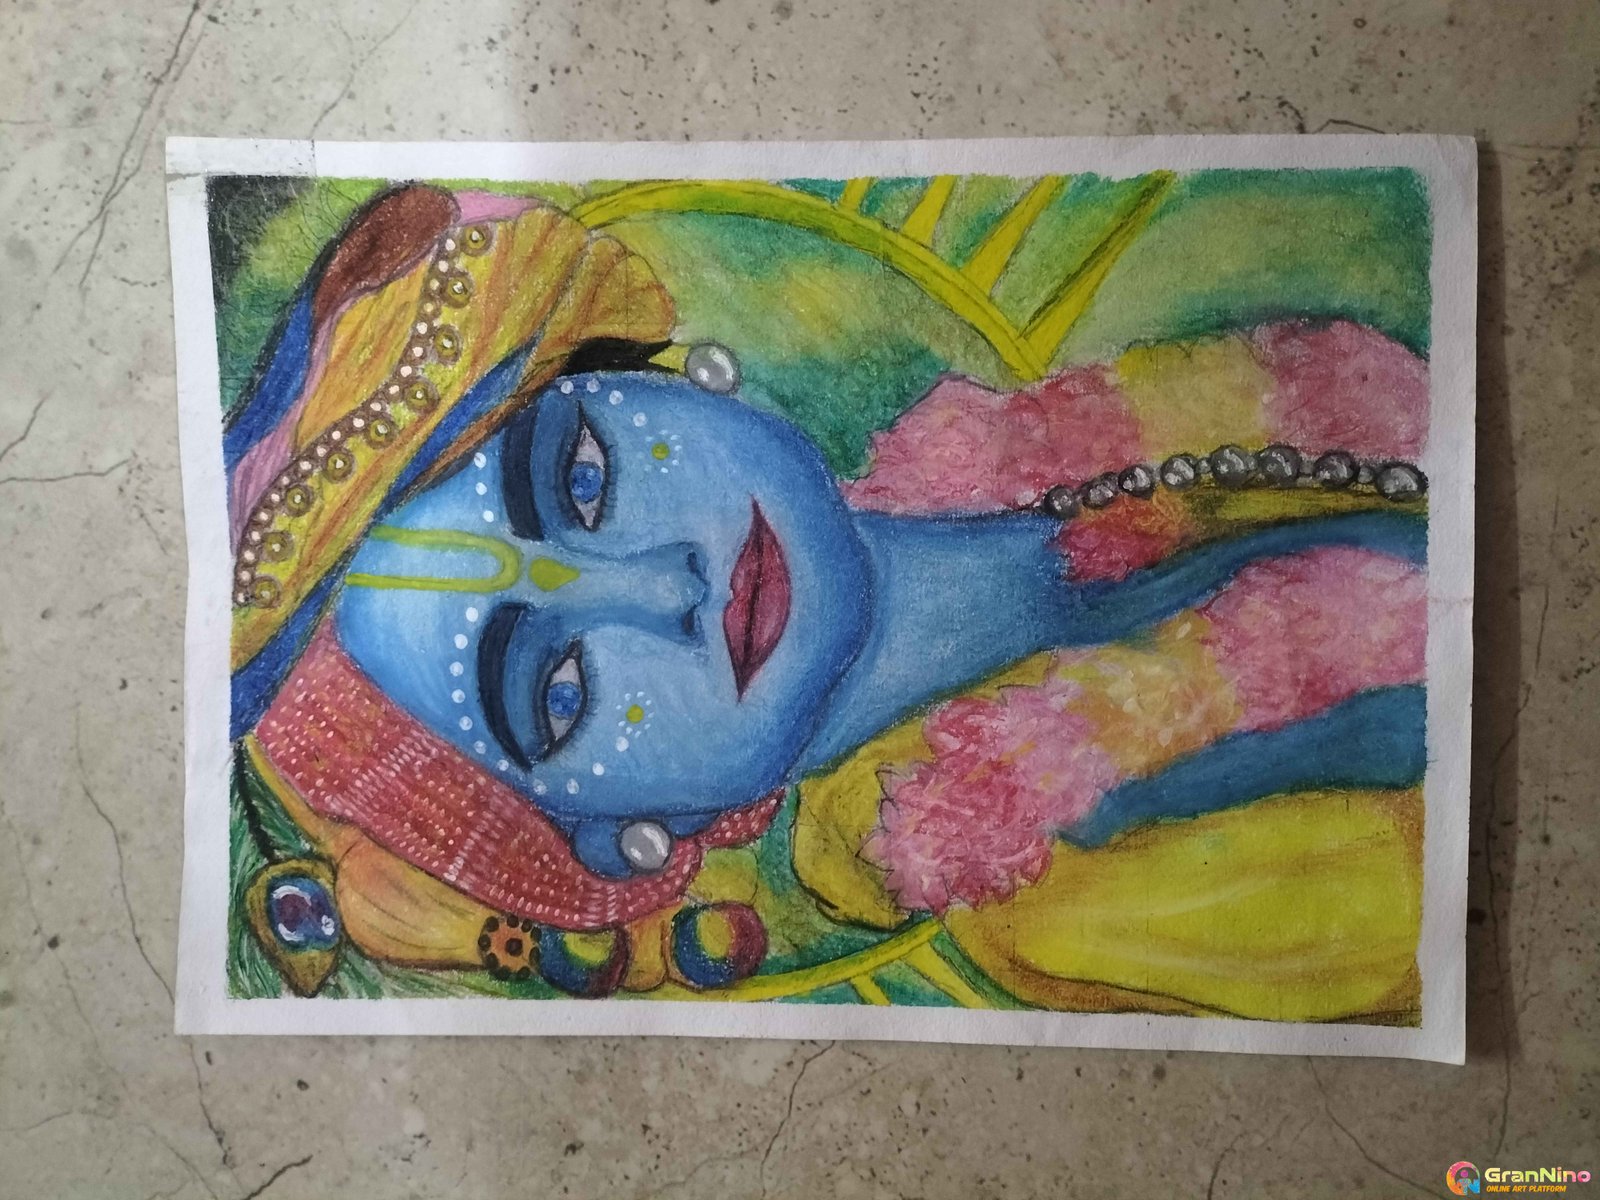 How to: Draw Lord Krishna with colour pencils | Sparks of Art - YouTube